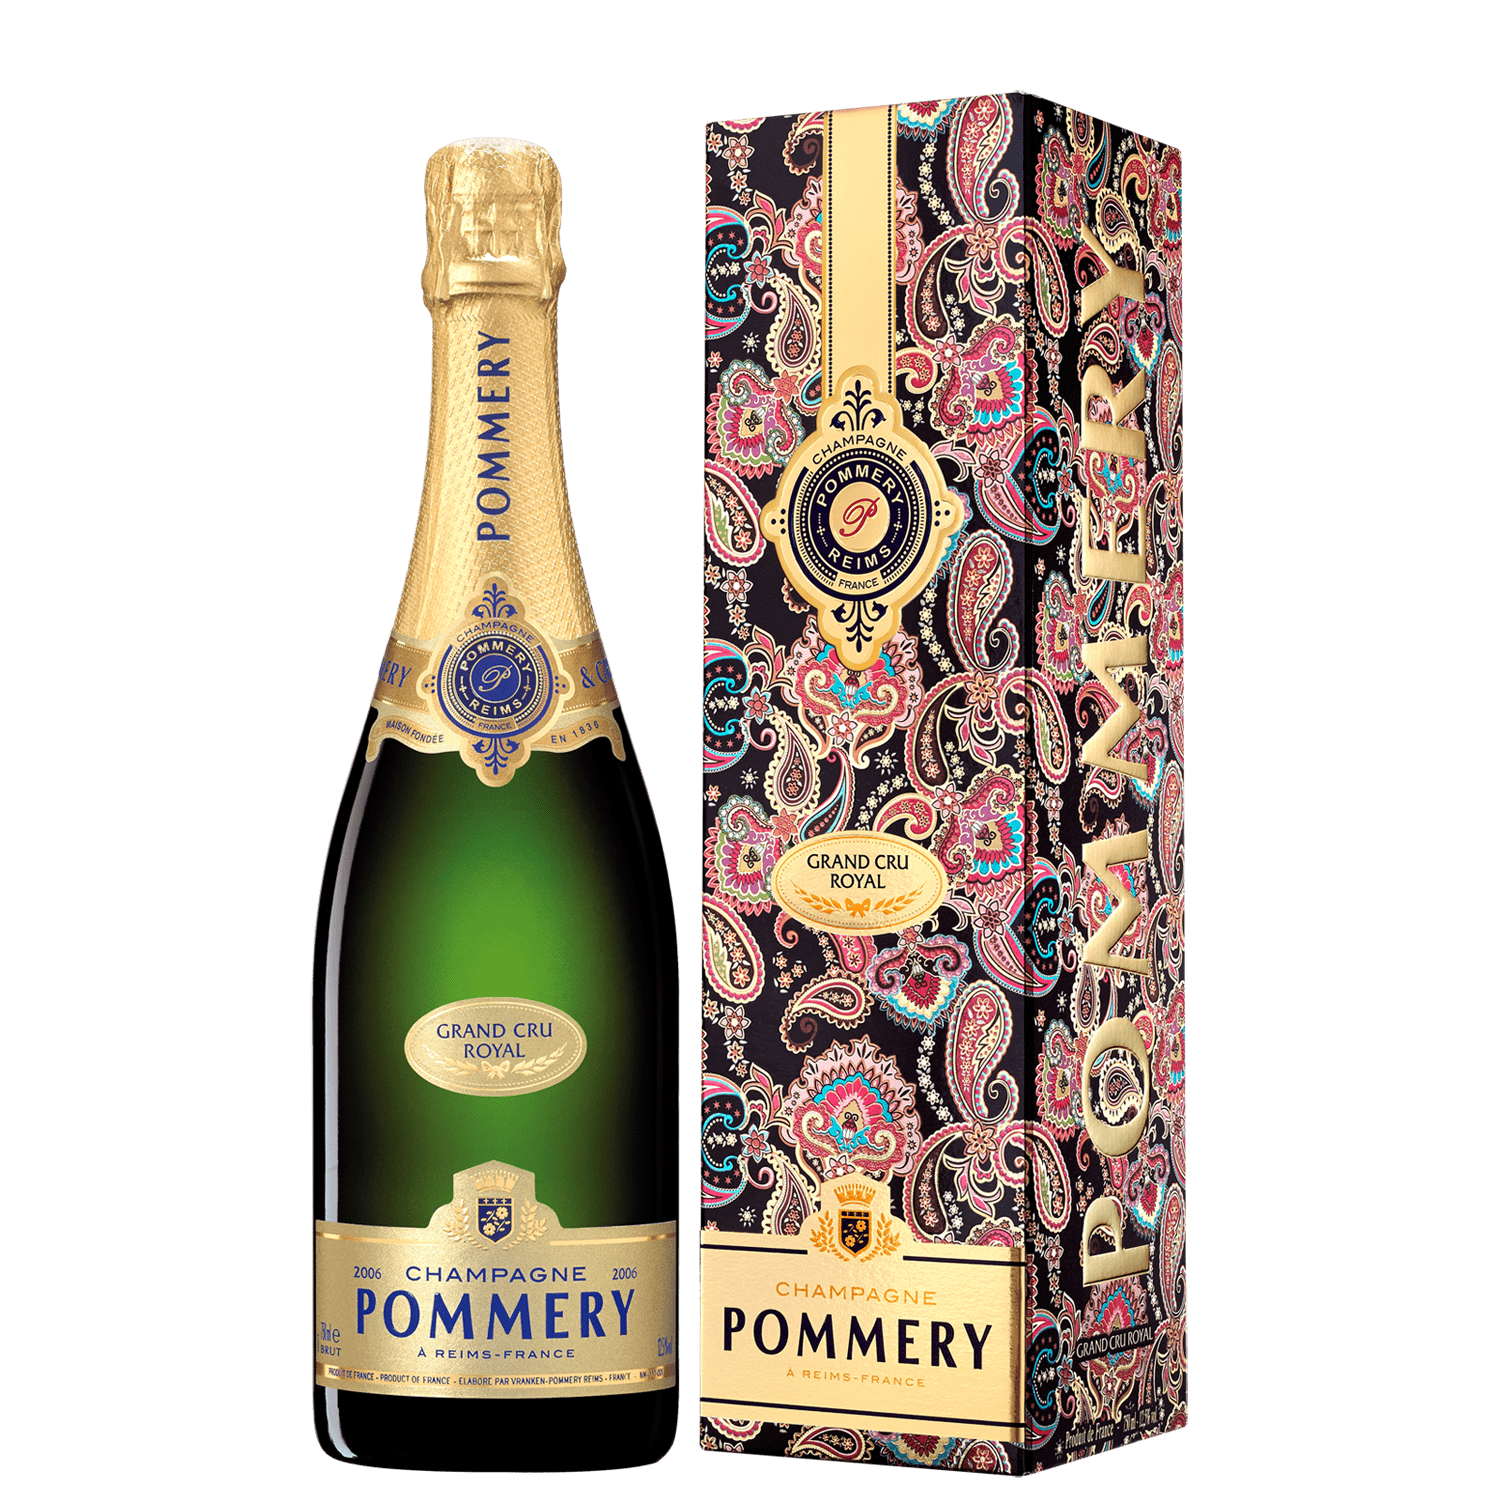 Bottle of Pommery Grand Cru 2008 with case